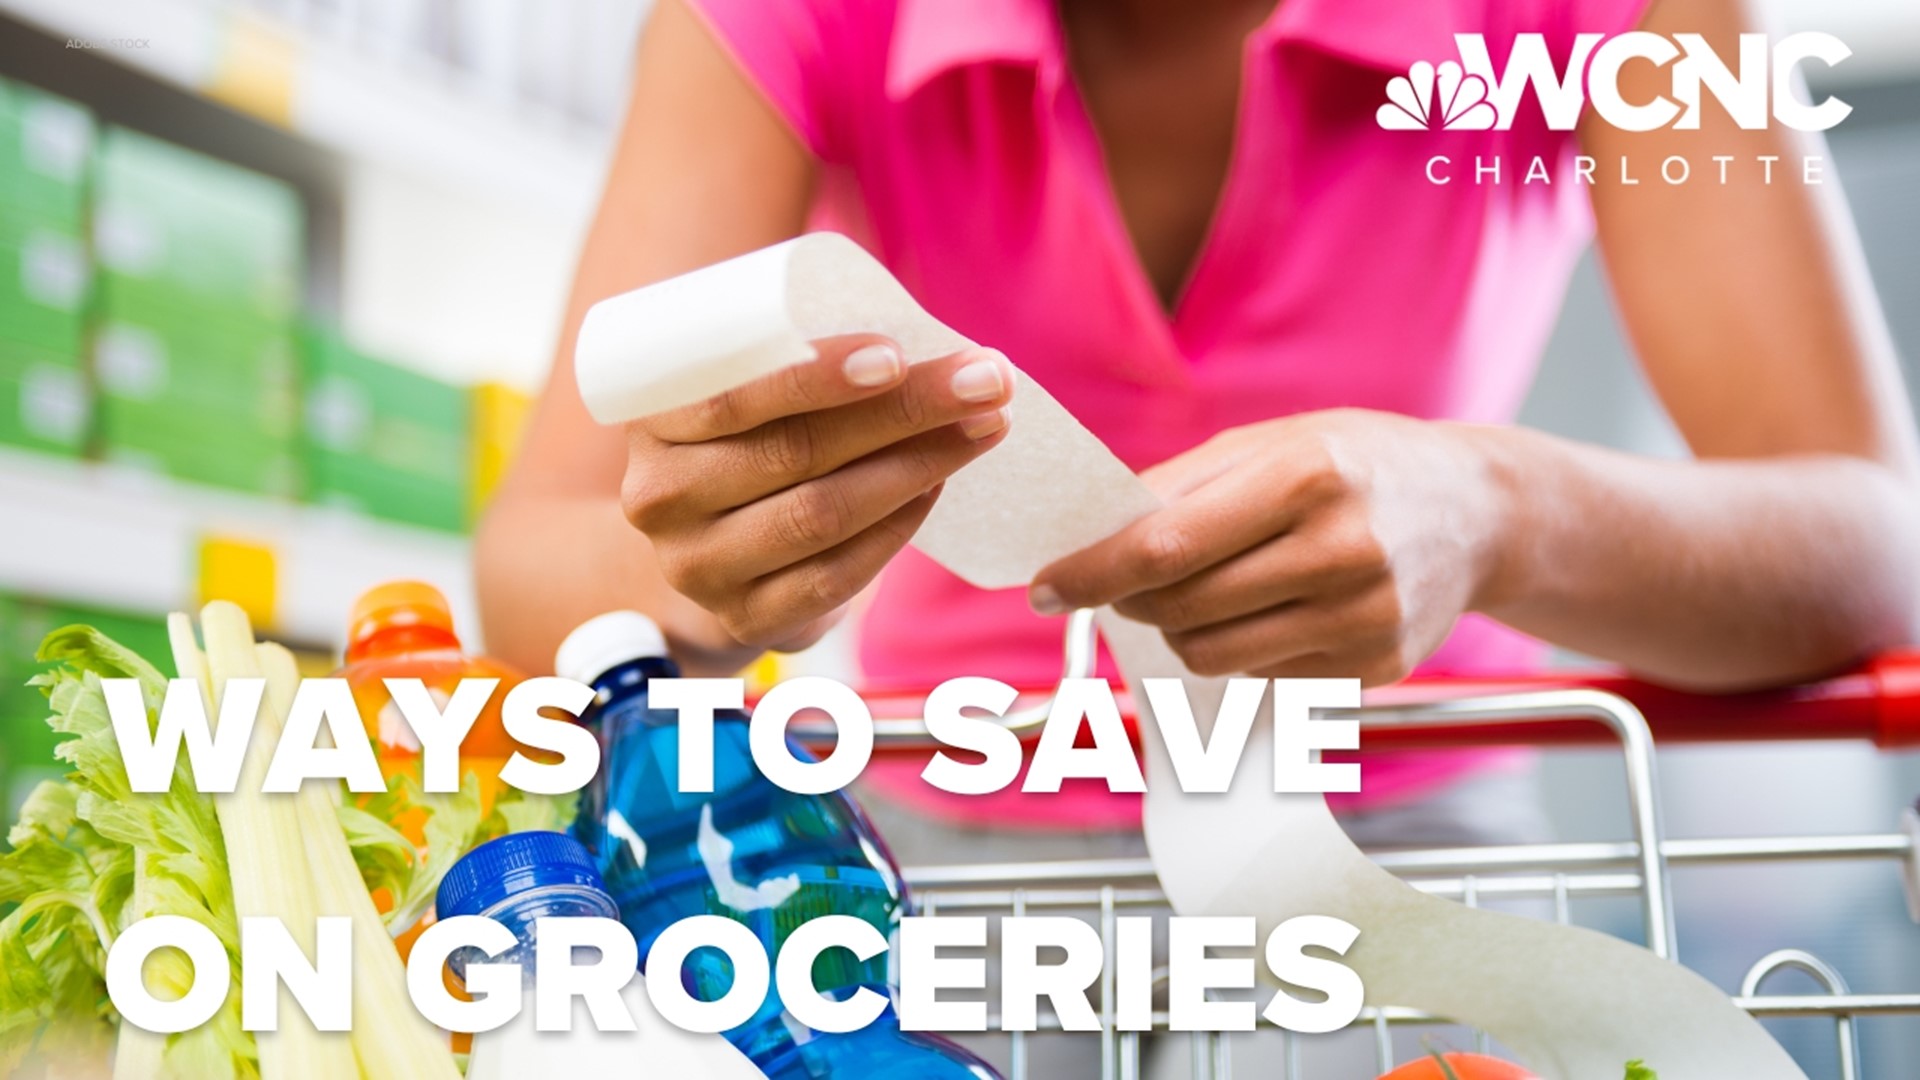 Use these strategies to save money the next time you’re getting groceries.